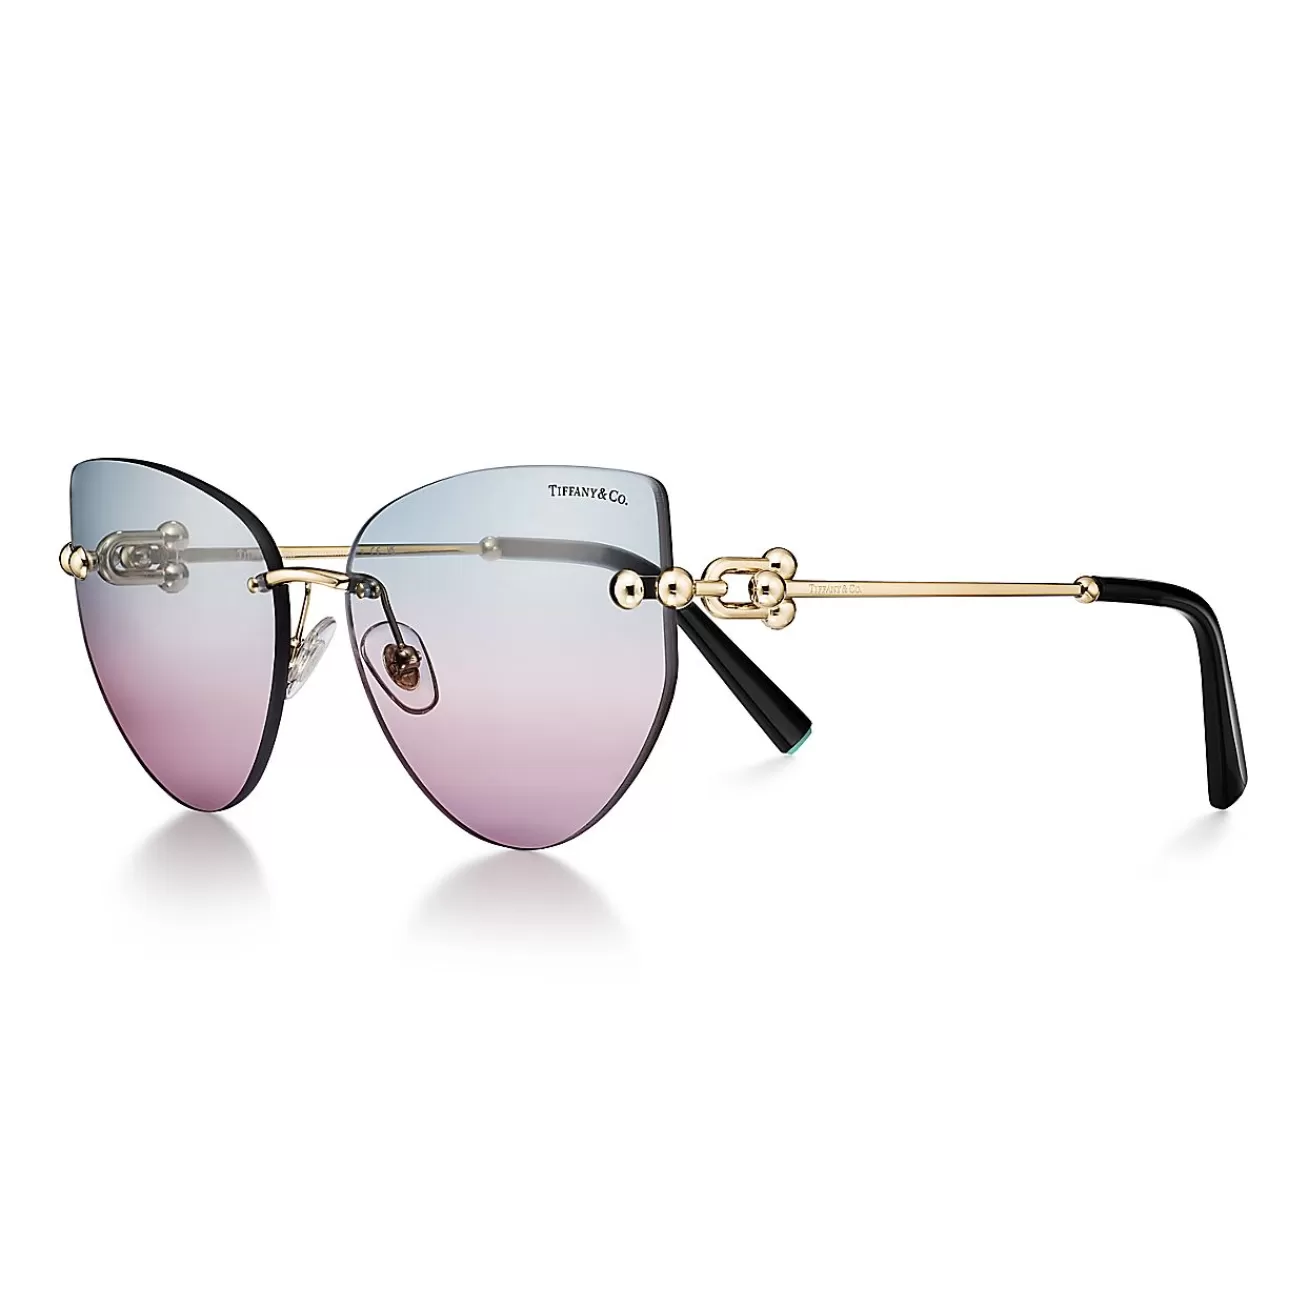 Tiffany & Co. Tiffany HardWear Sunglasses in Pale Gold-colored Metal with Violet Gradient Lens | ^Women Tiffany HardWear | Sunglasses